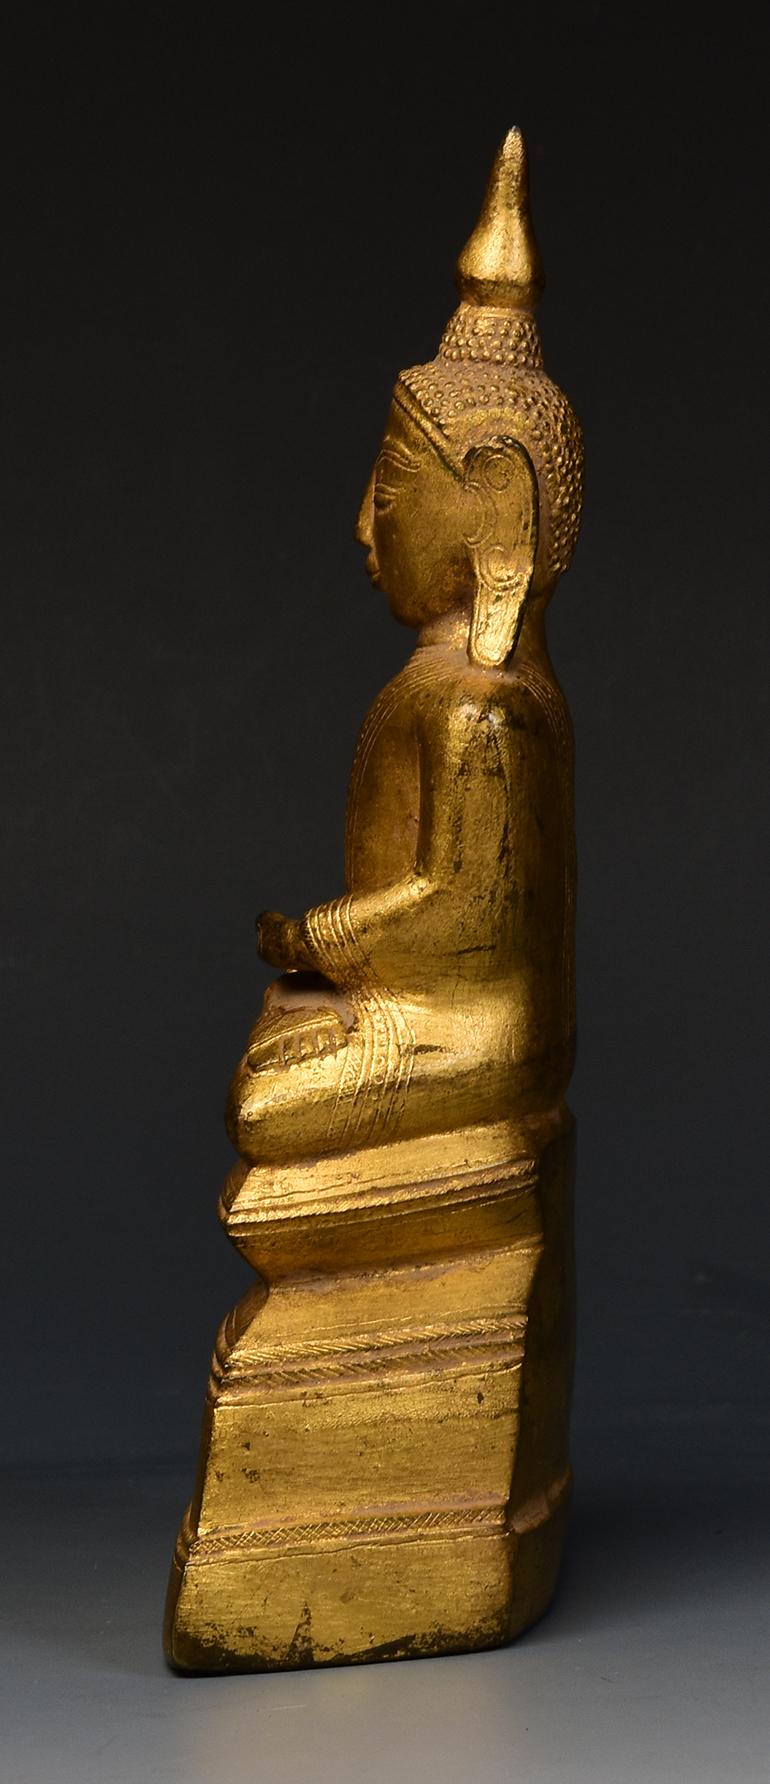 18th Century, Shan, Antique Burmese Bronze Seated Buddha with Gilded Gold 3